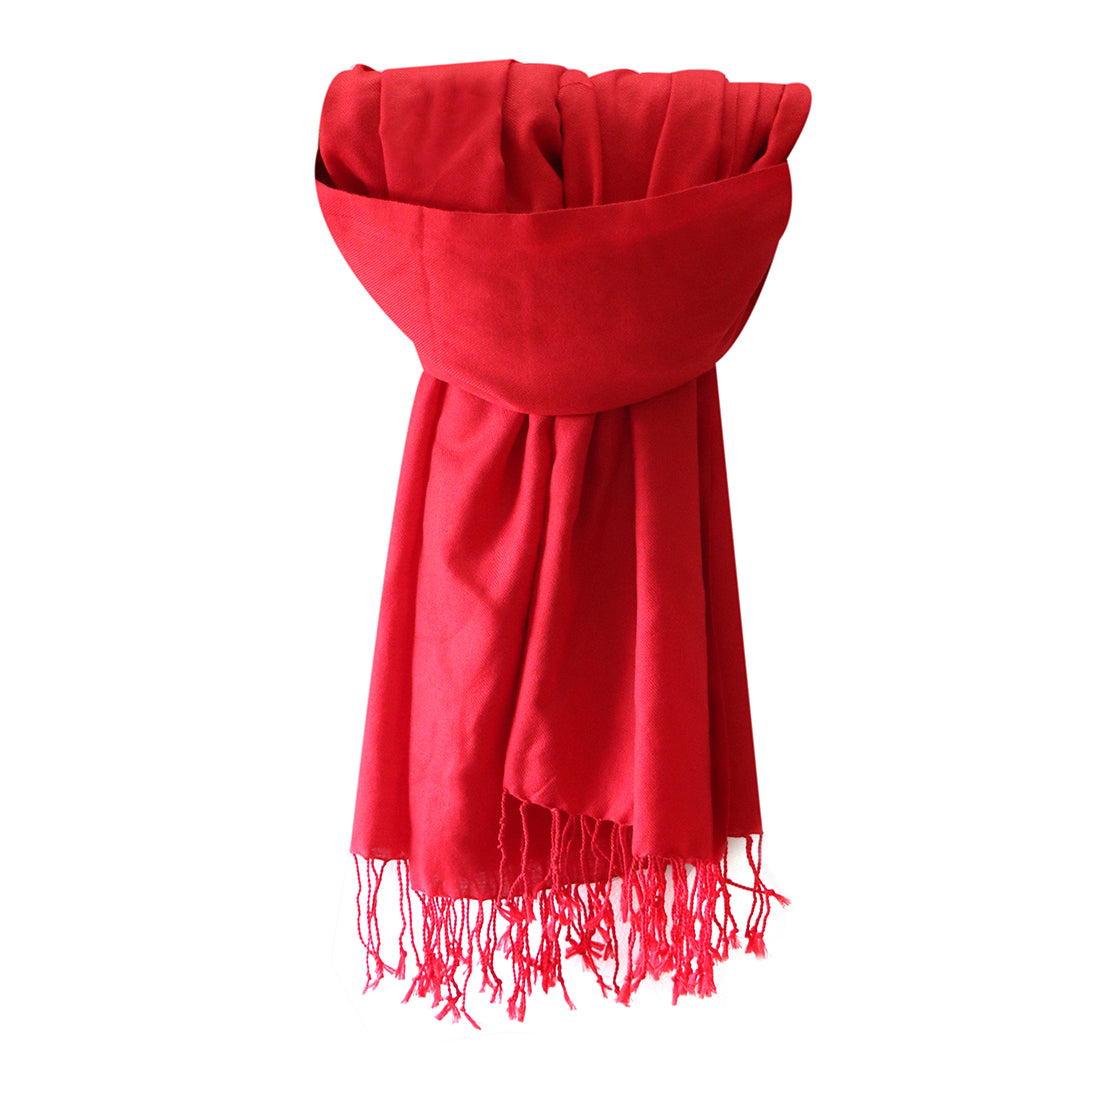 CONTEMPORARY SOLID BRIGHT RED ACRYLIC SCARF